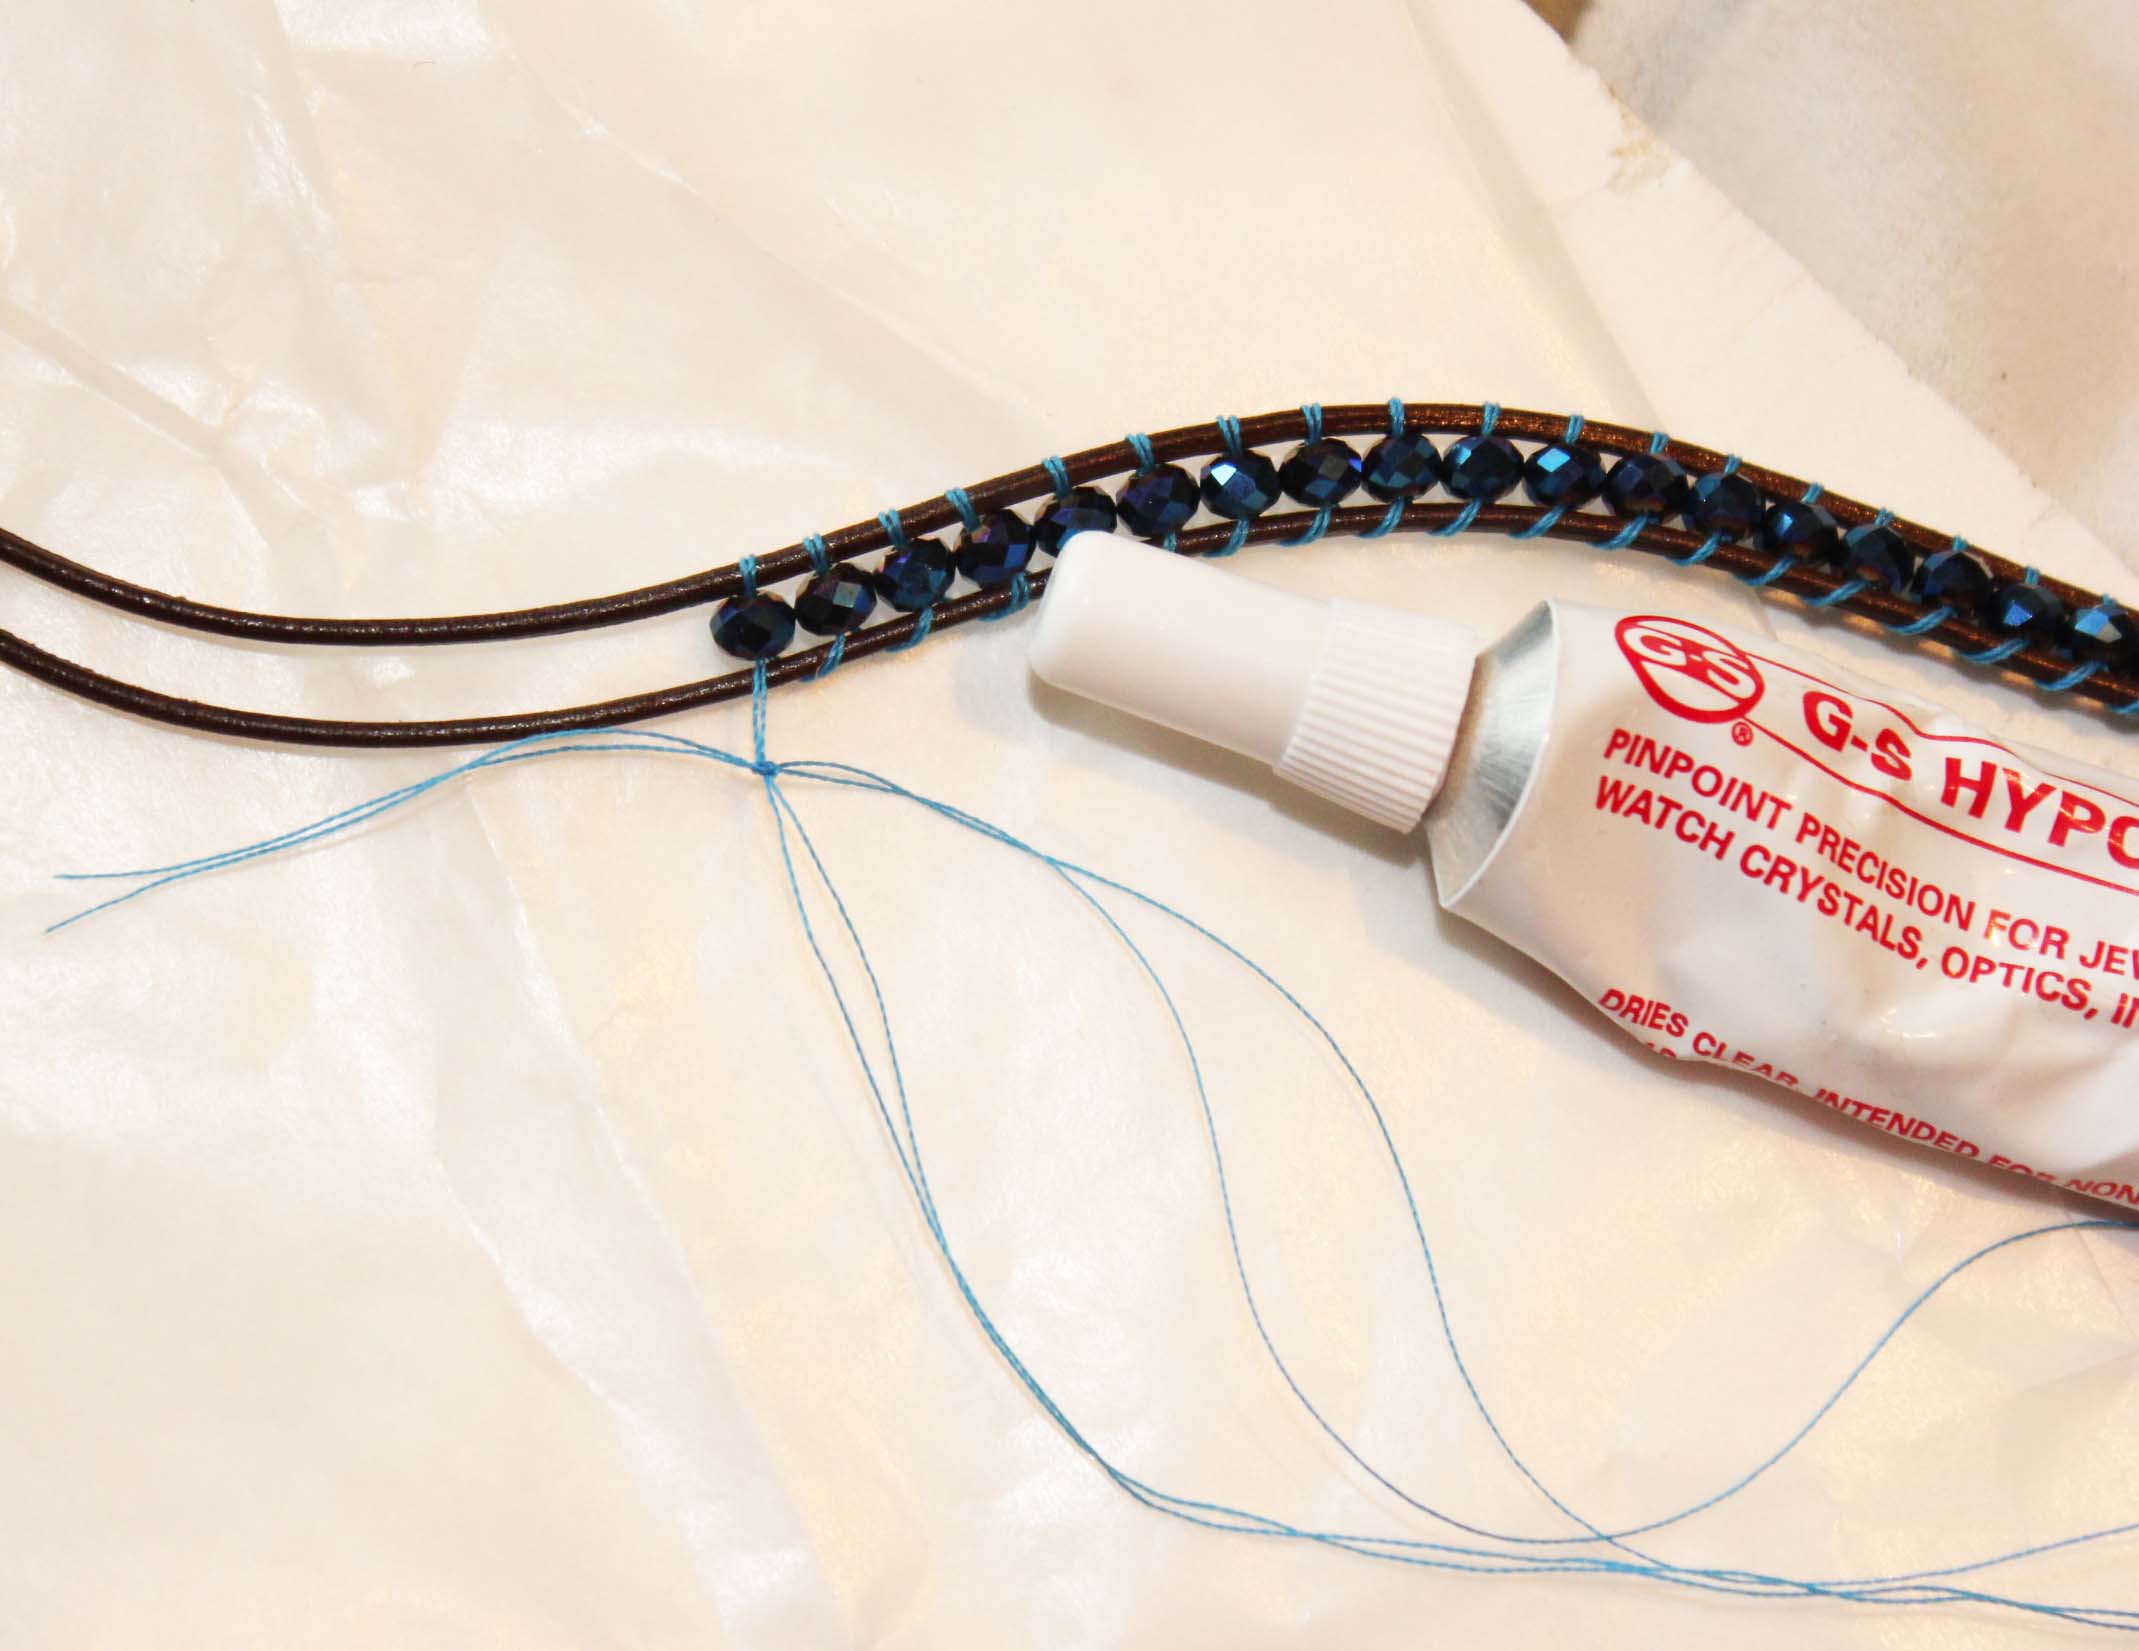 Add new thread to continue adding beads by knotting new thread to old and glueing with hypo cement